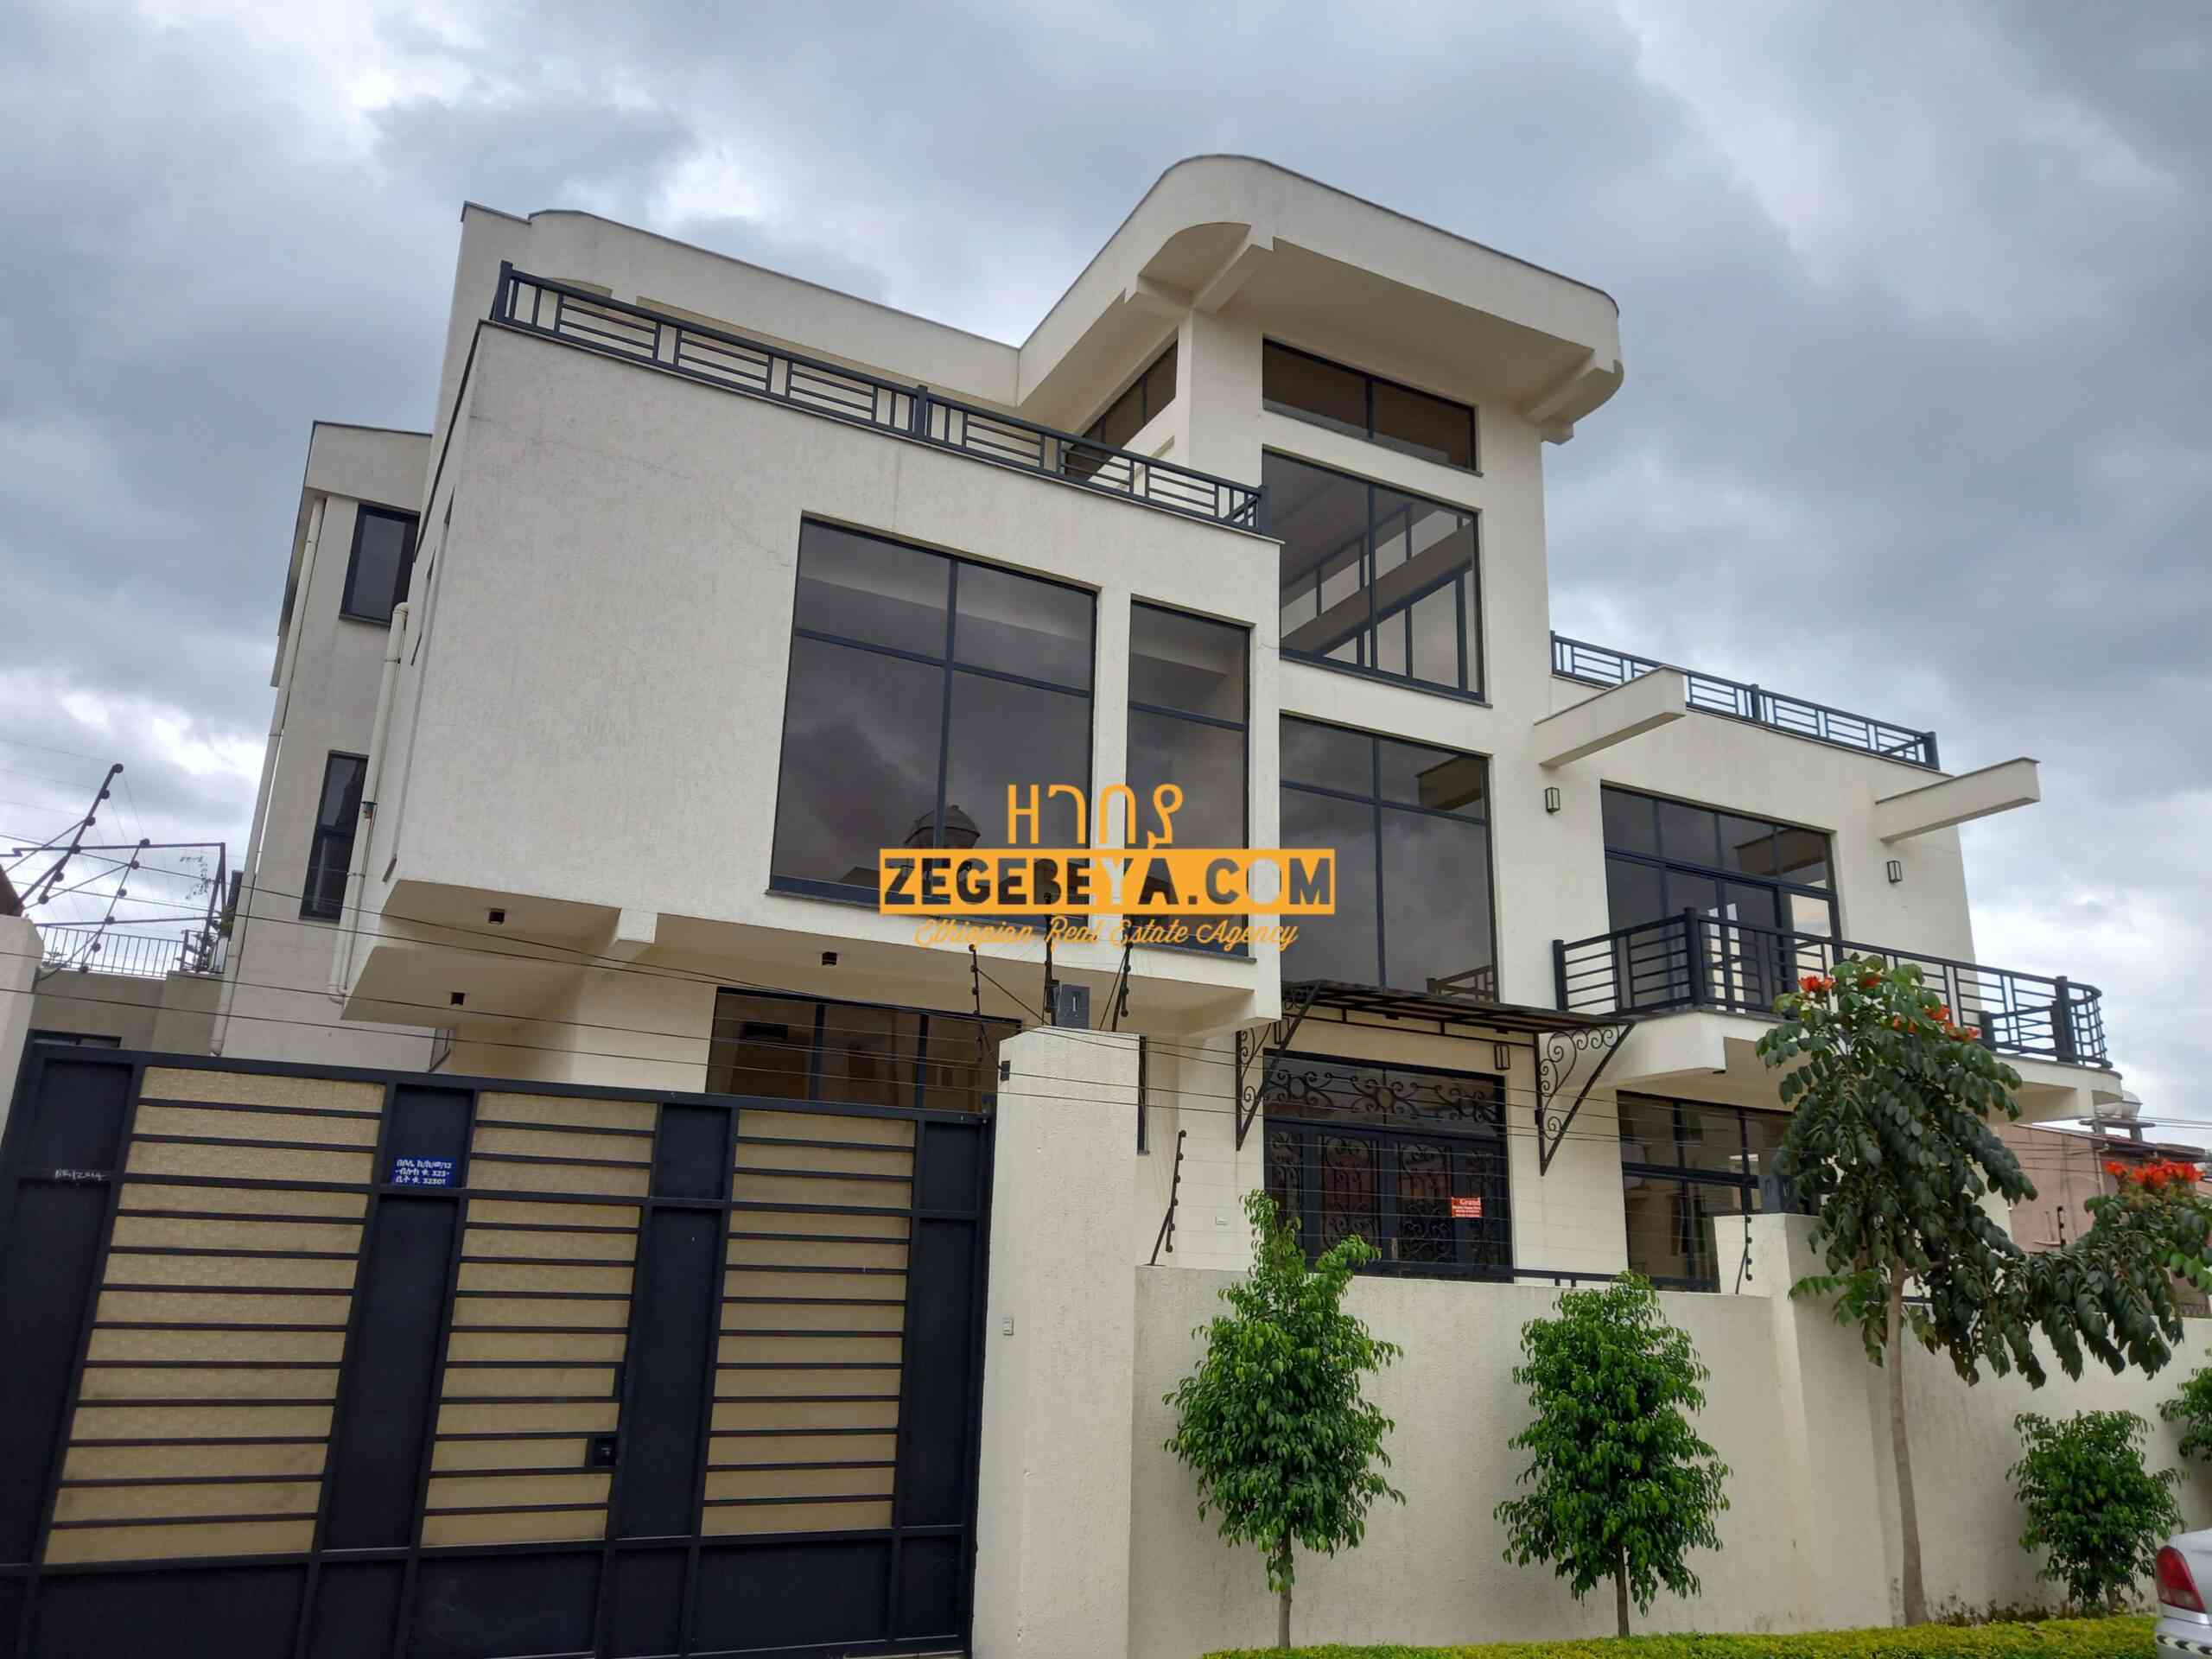 New 8 Bedrooms House For Rent At Bole Bulbula